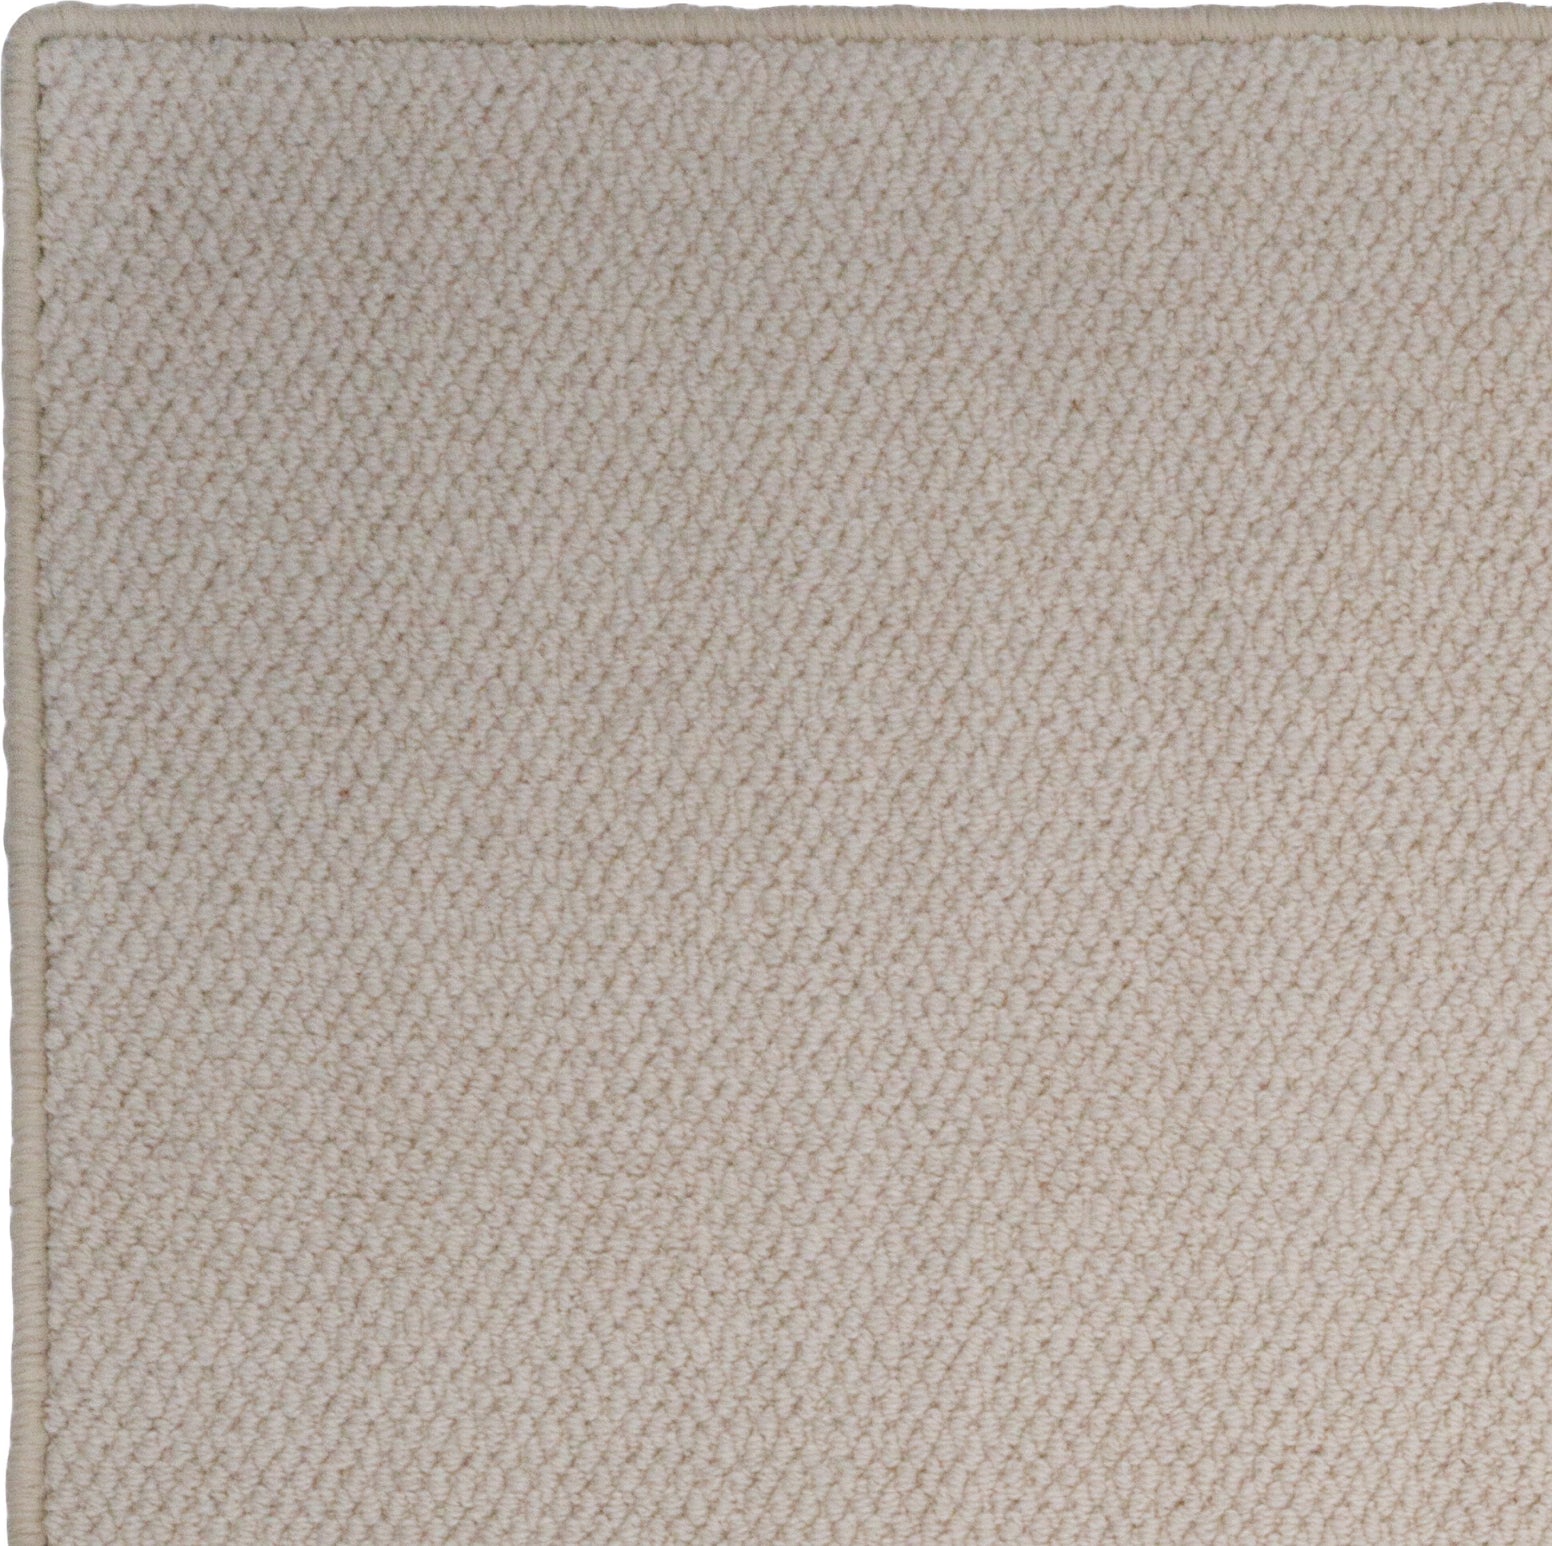 Capel Inlet 2079 Straw Area Rug main image